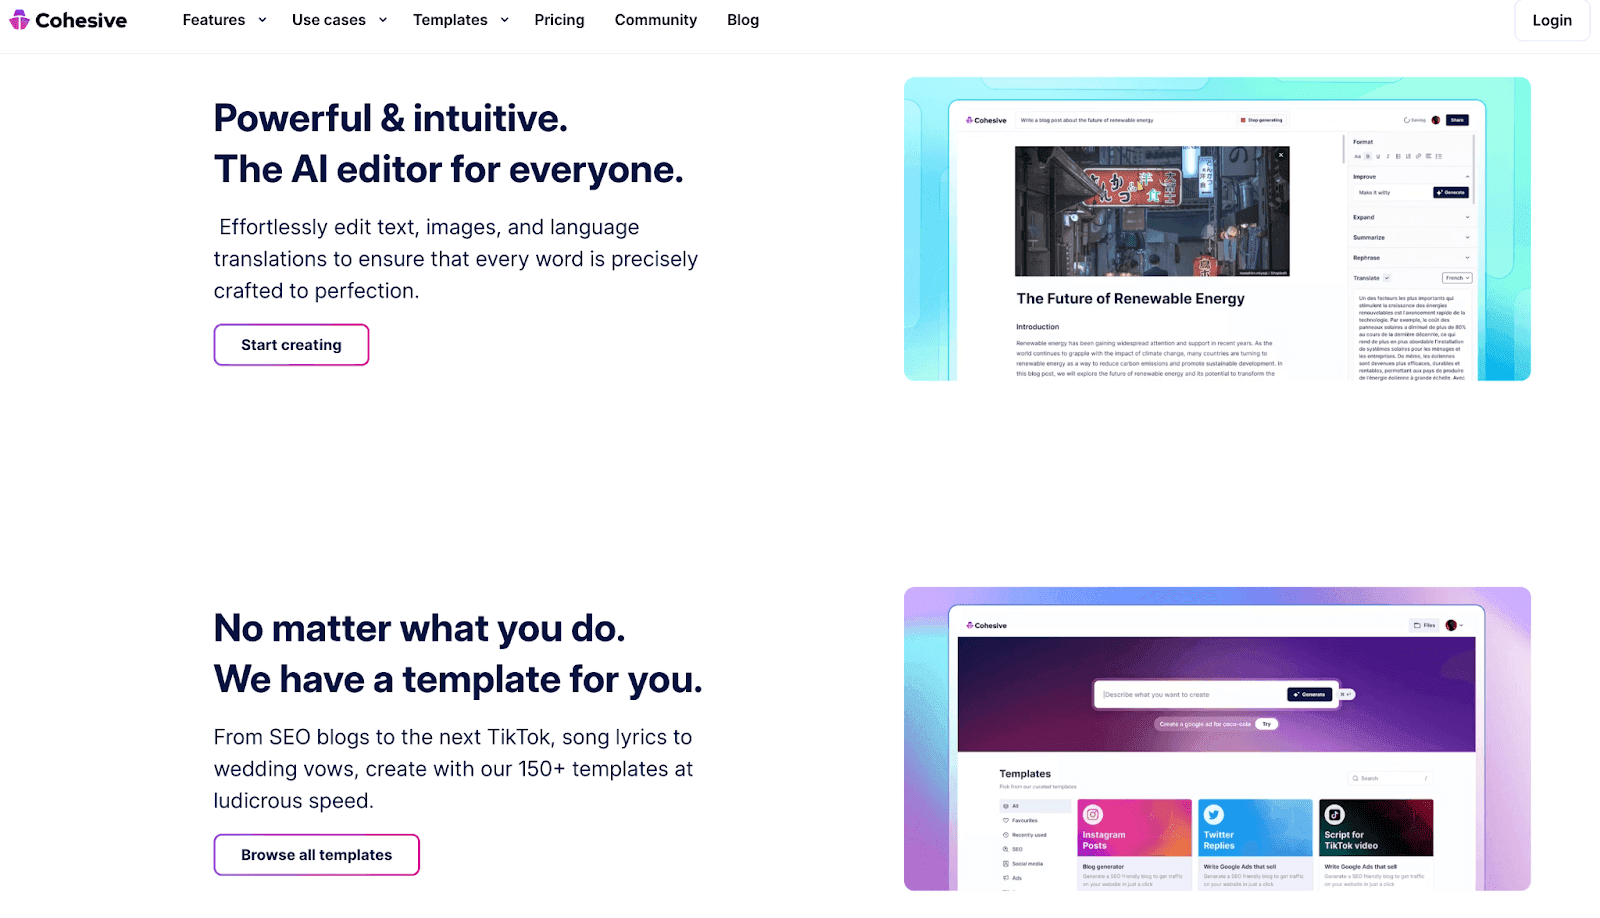 Cohesive website landing page